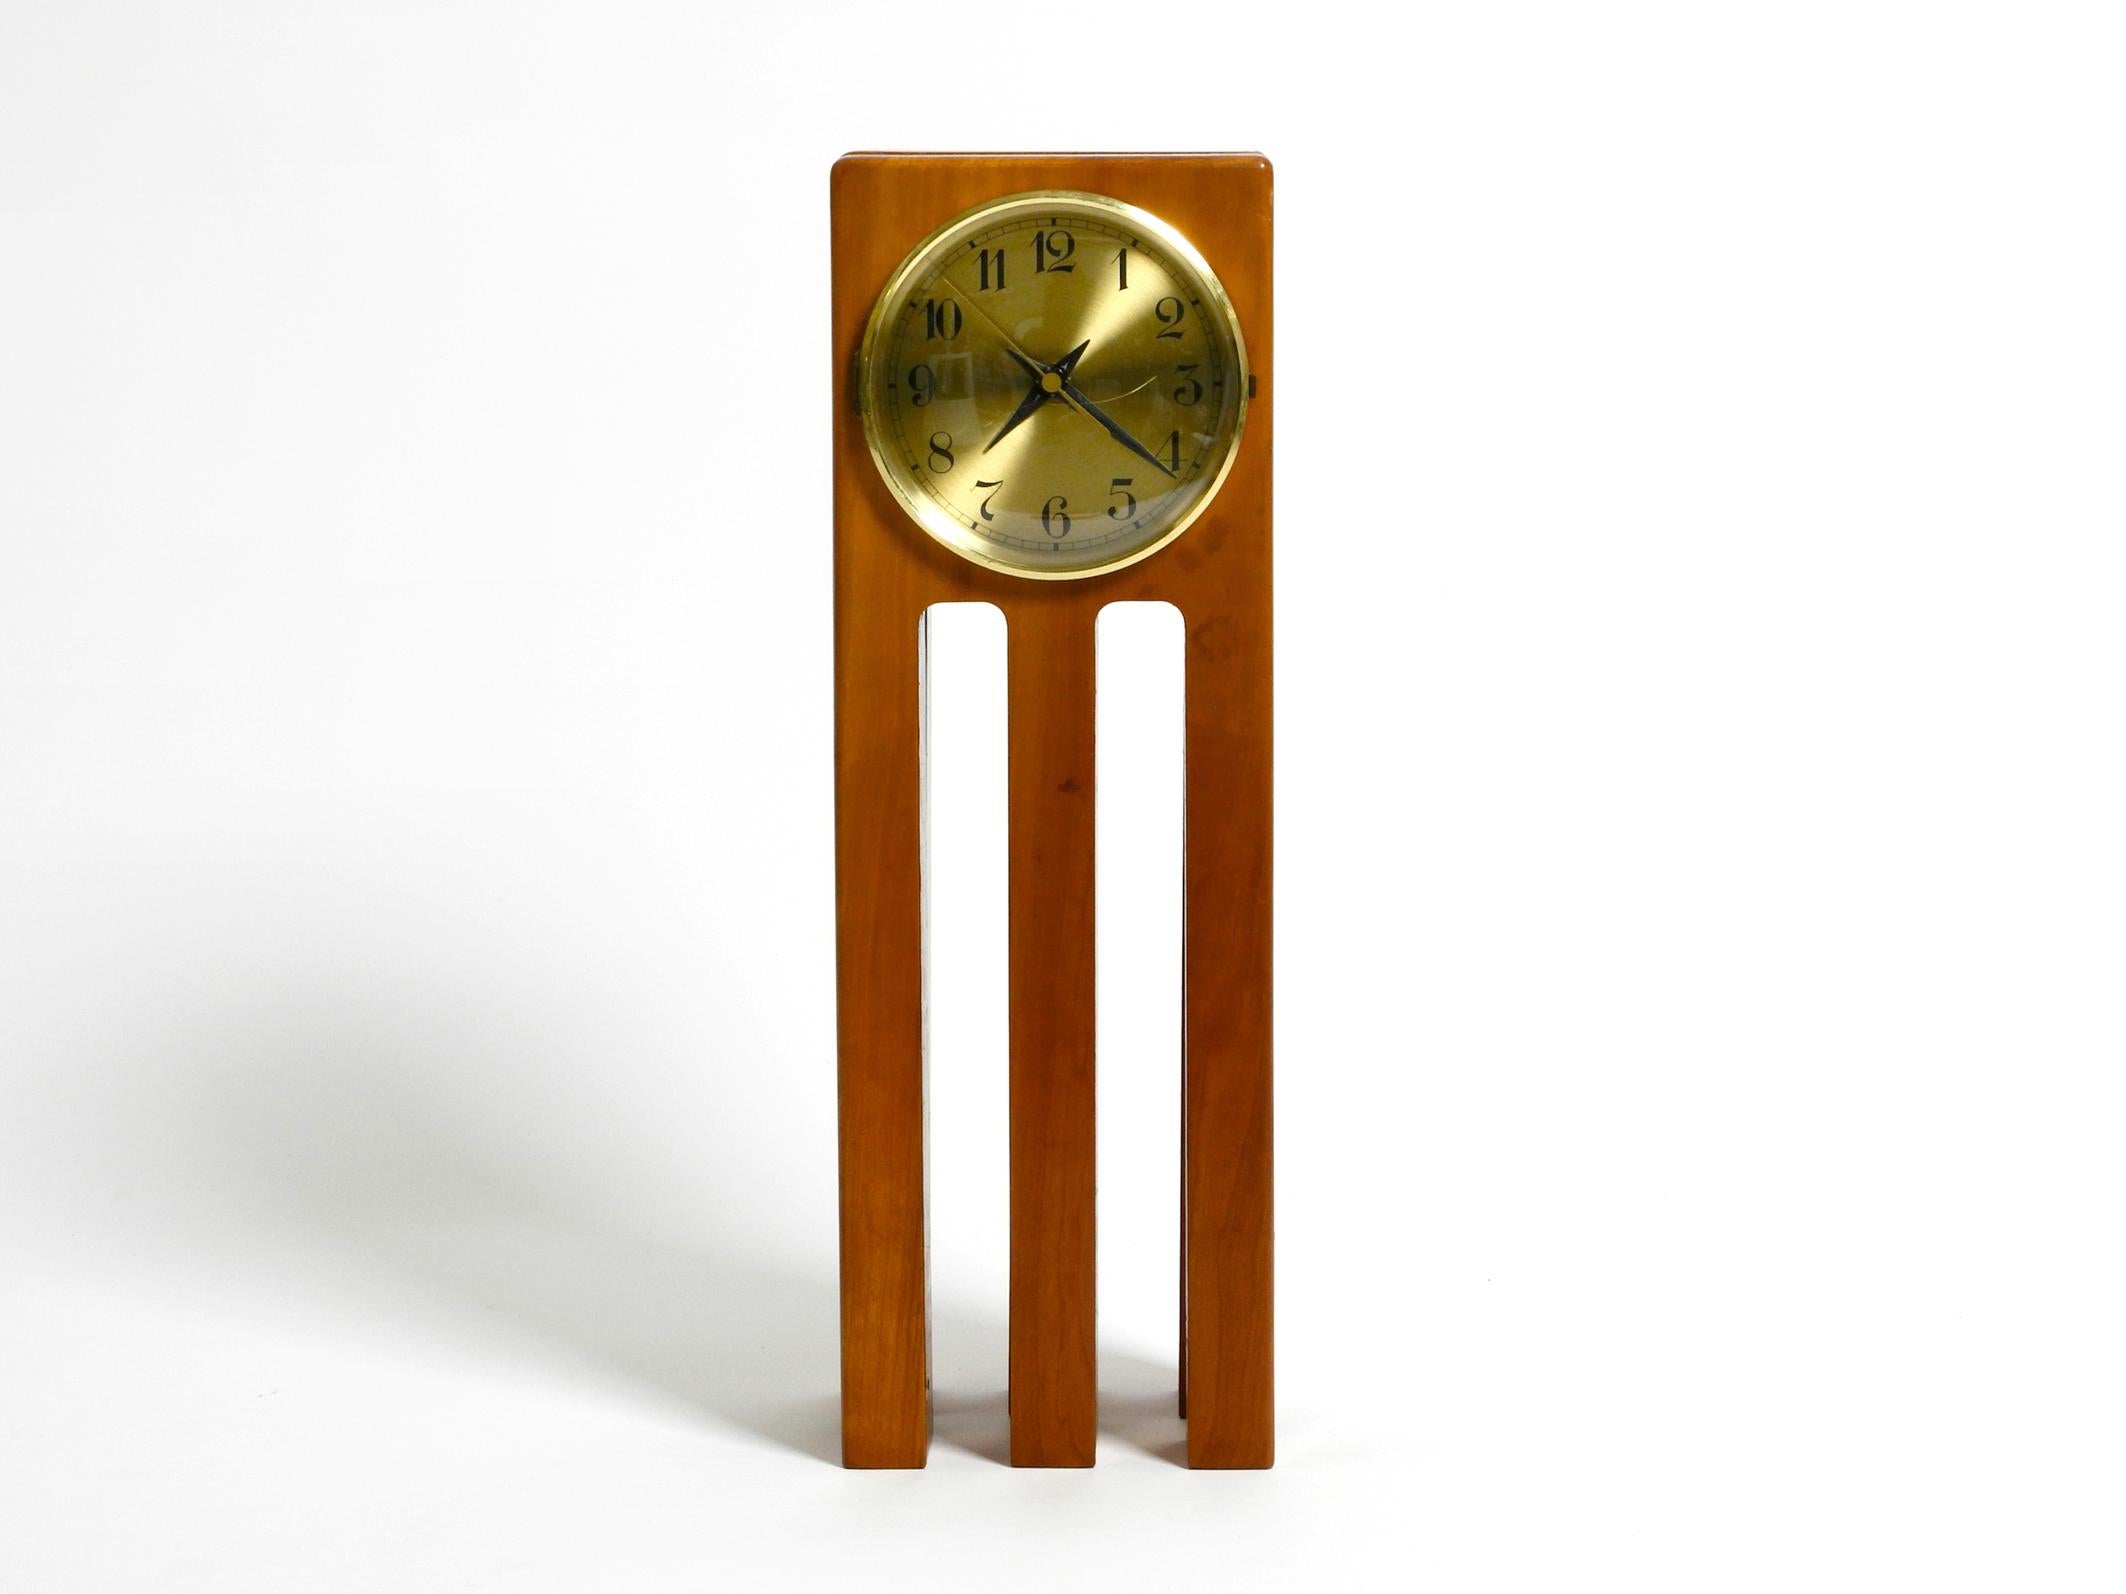 Large, unusual 1980s Postmodern design table clock made of cherry wood
Great interesting design made of solid wood. Manufacturer is unknown.
But it is certainly from a well-known manufacturer, because of the good quality.
With battery operation